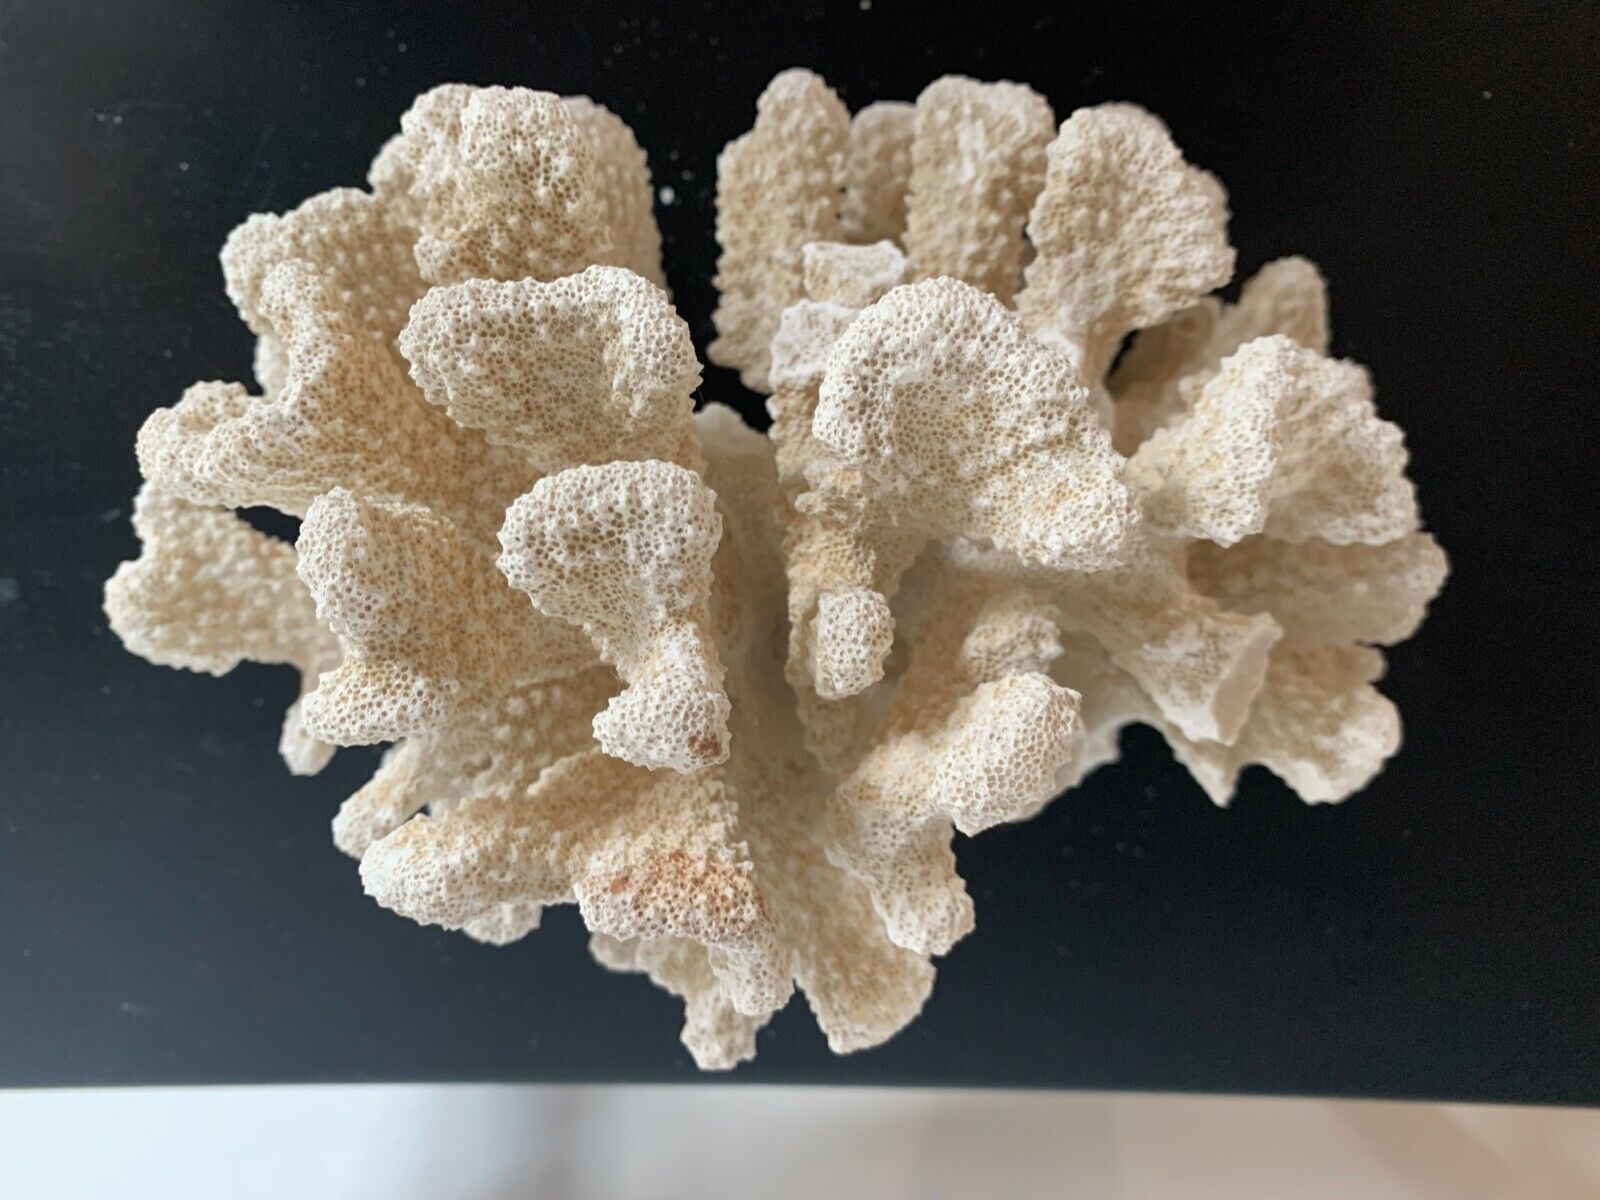 Coral Natural White Reef Home Decoration Aquarium Very Large 6.5-8.0 in.  1kg